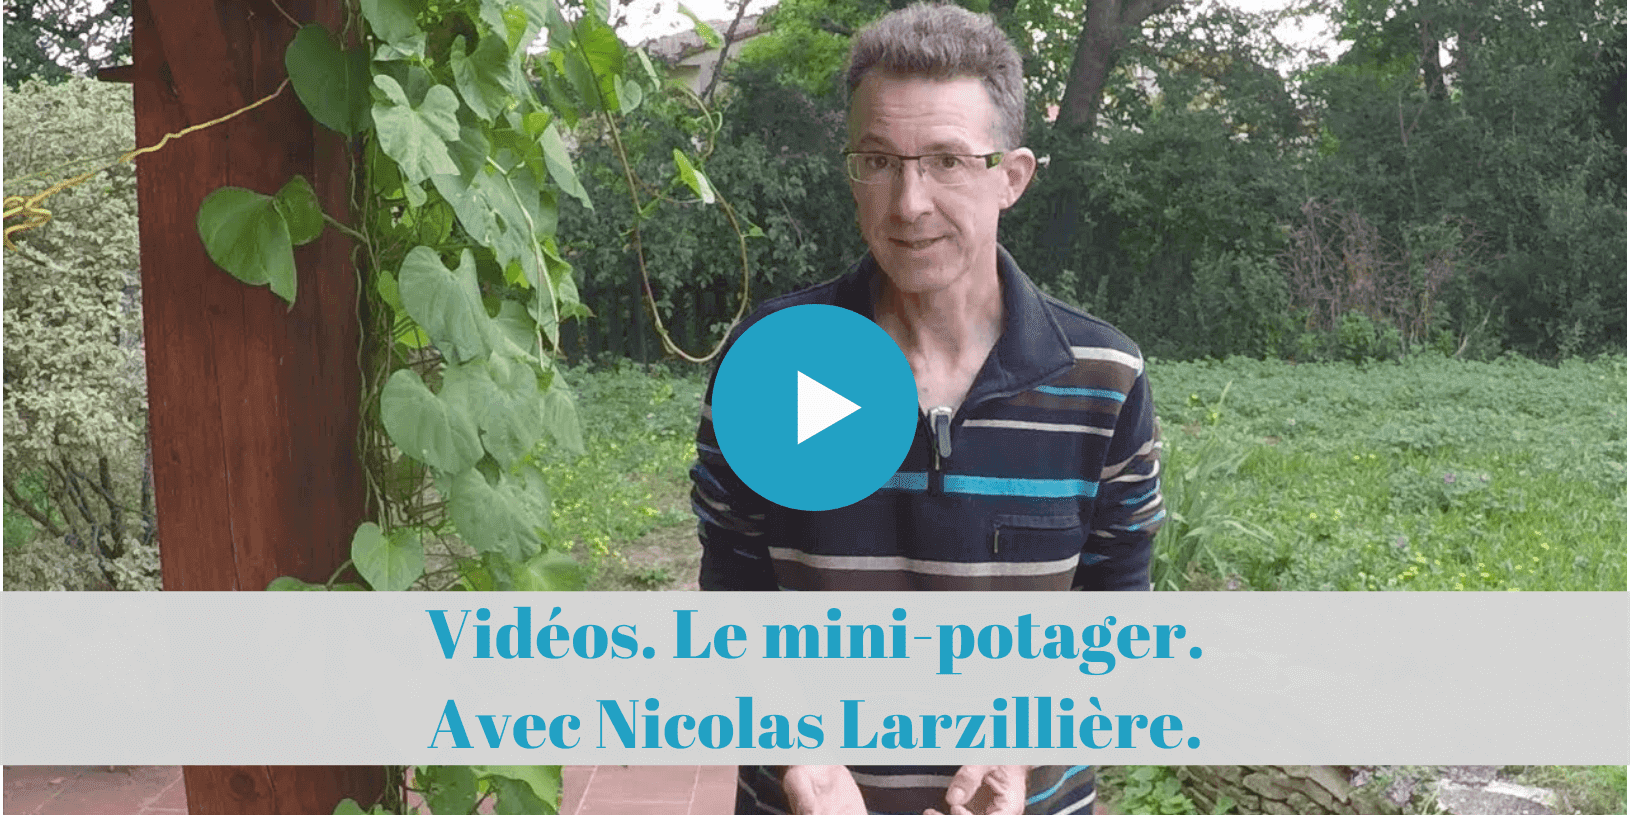 permaculture, agroecologie, agriculture, regeneratrice, reconversion, formation, distance